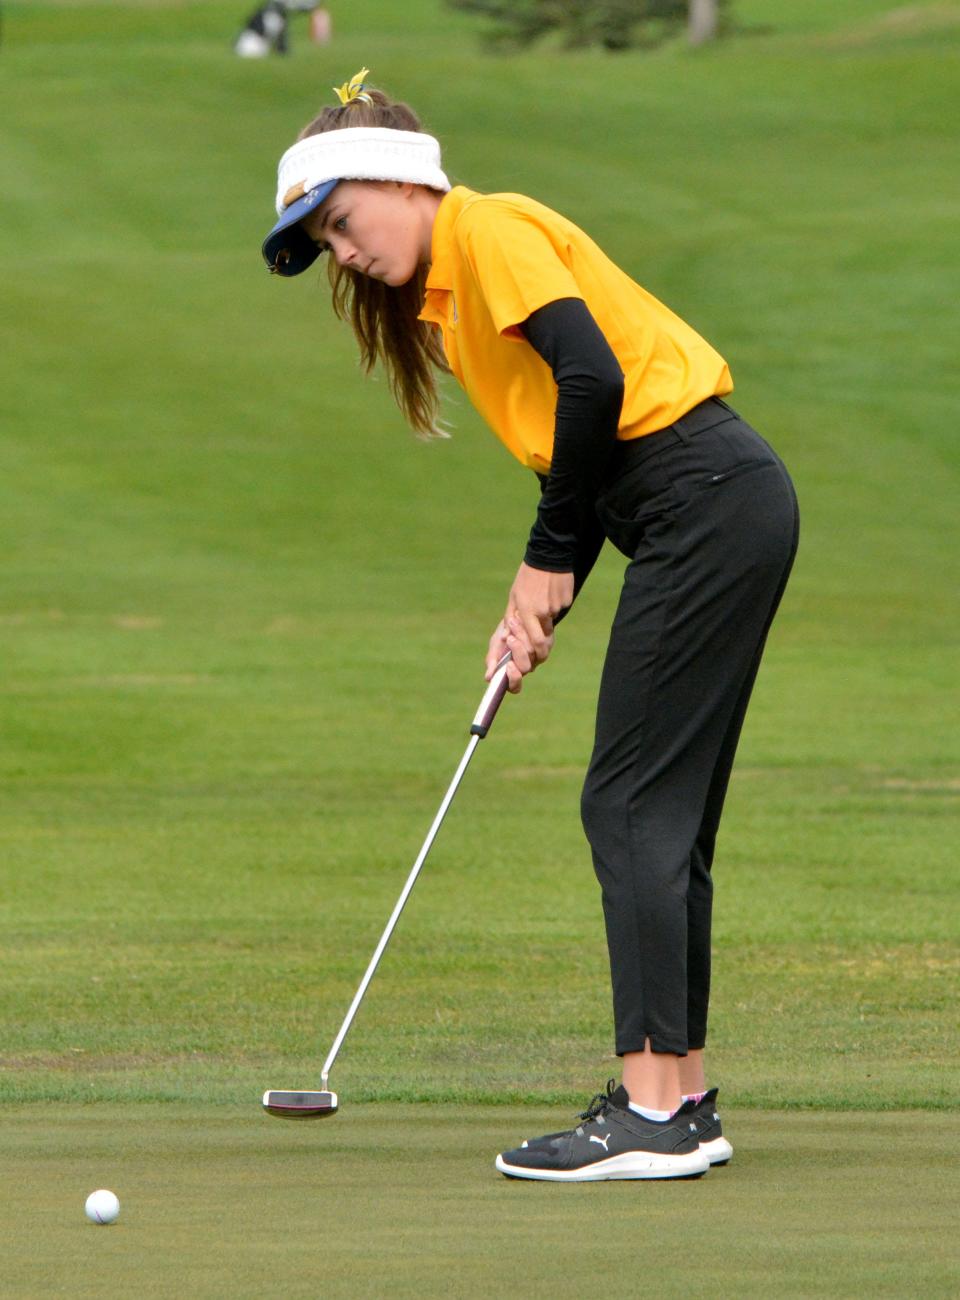 Aberdeen Central's Olivia Braun putts on No. 1 Yellow earlier this season during the Watertown Girls Golf Invitational at Cattail Crossing Golf Course.